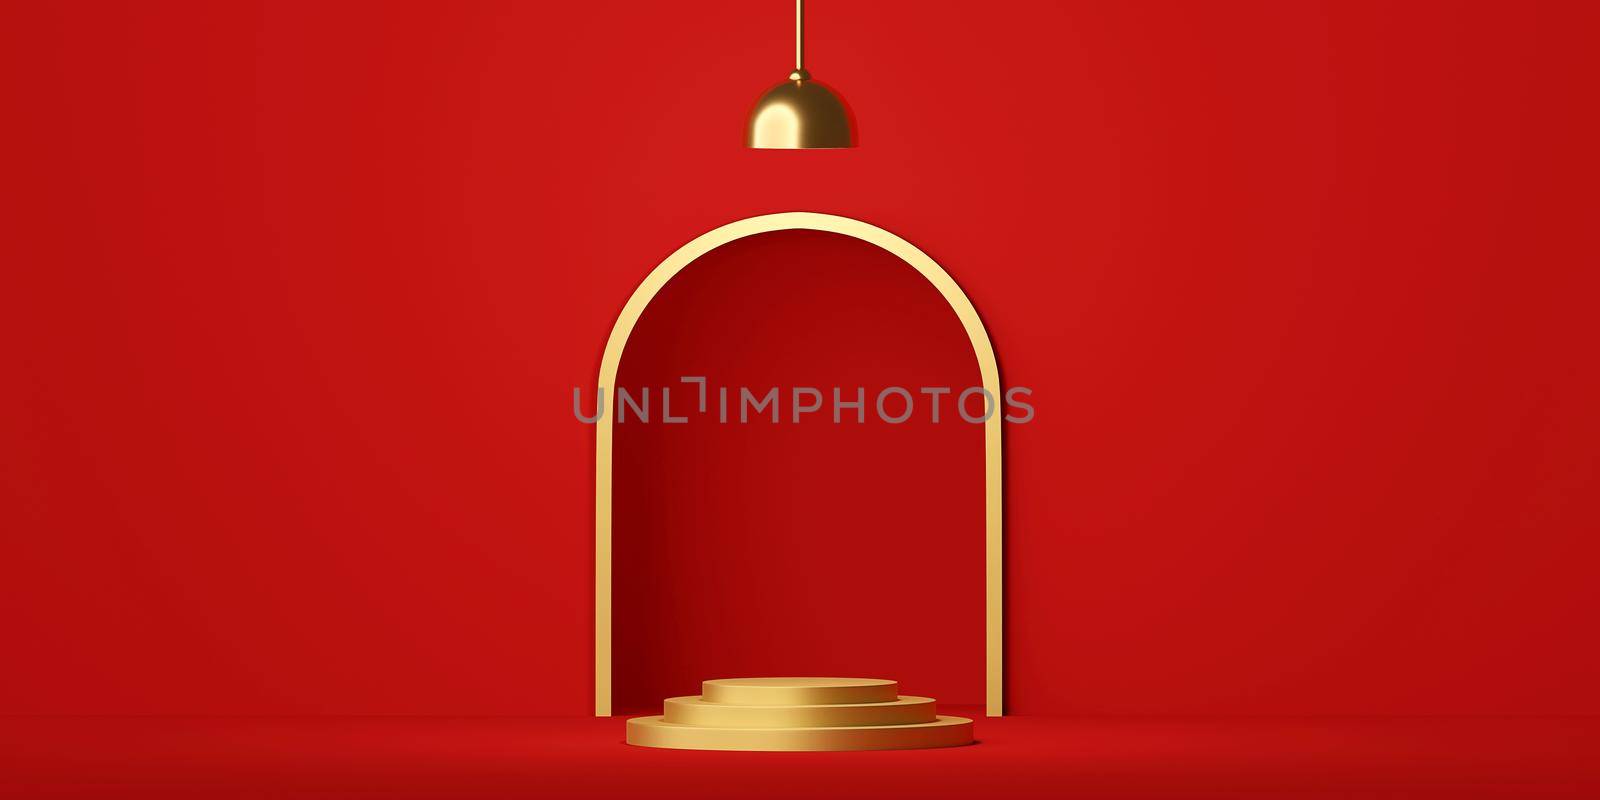 Scene of geometric shape podium with lamp on red background, 3d rendering by nutzchotwarut